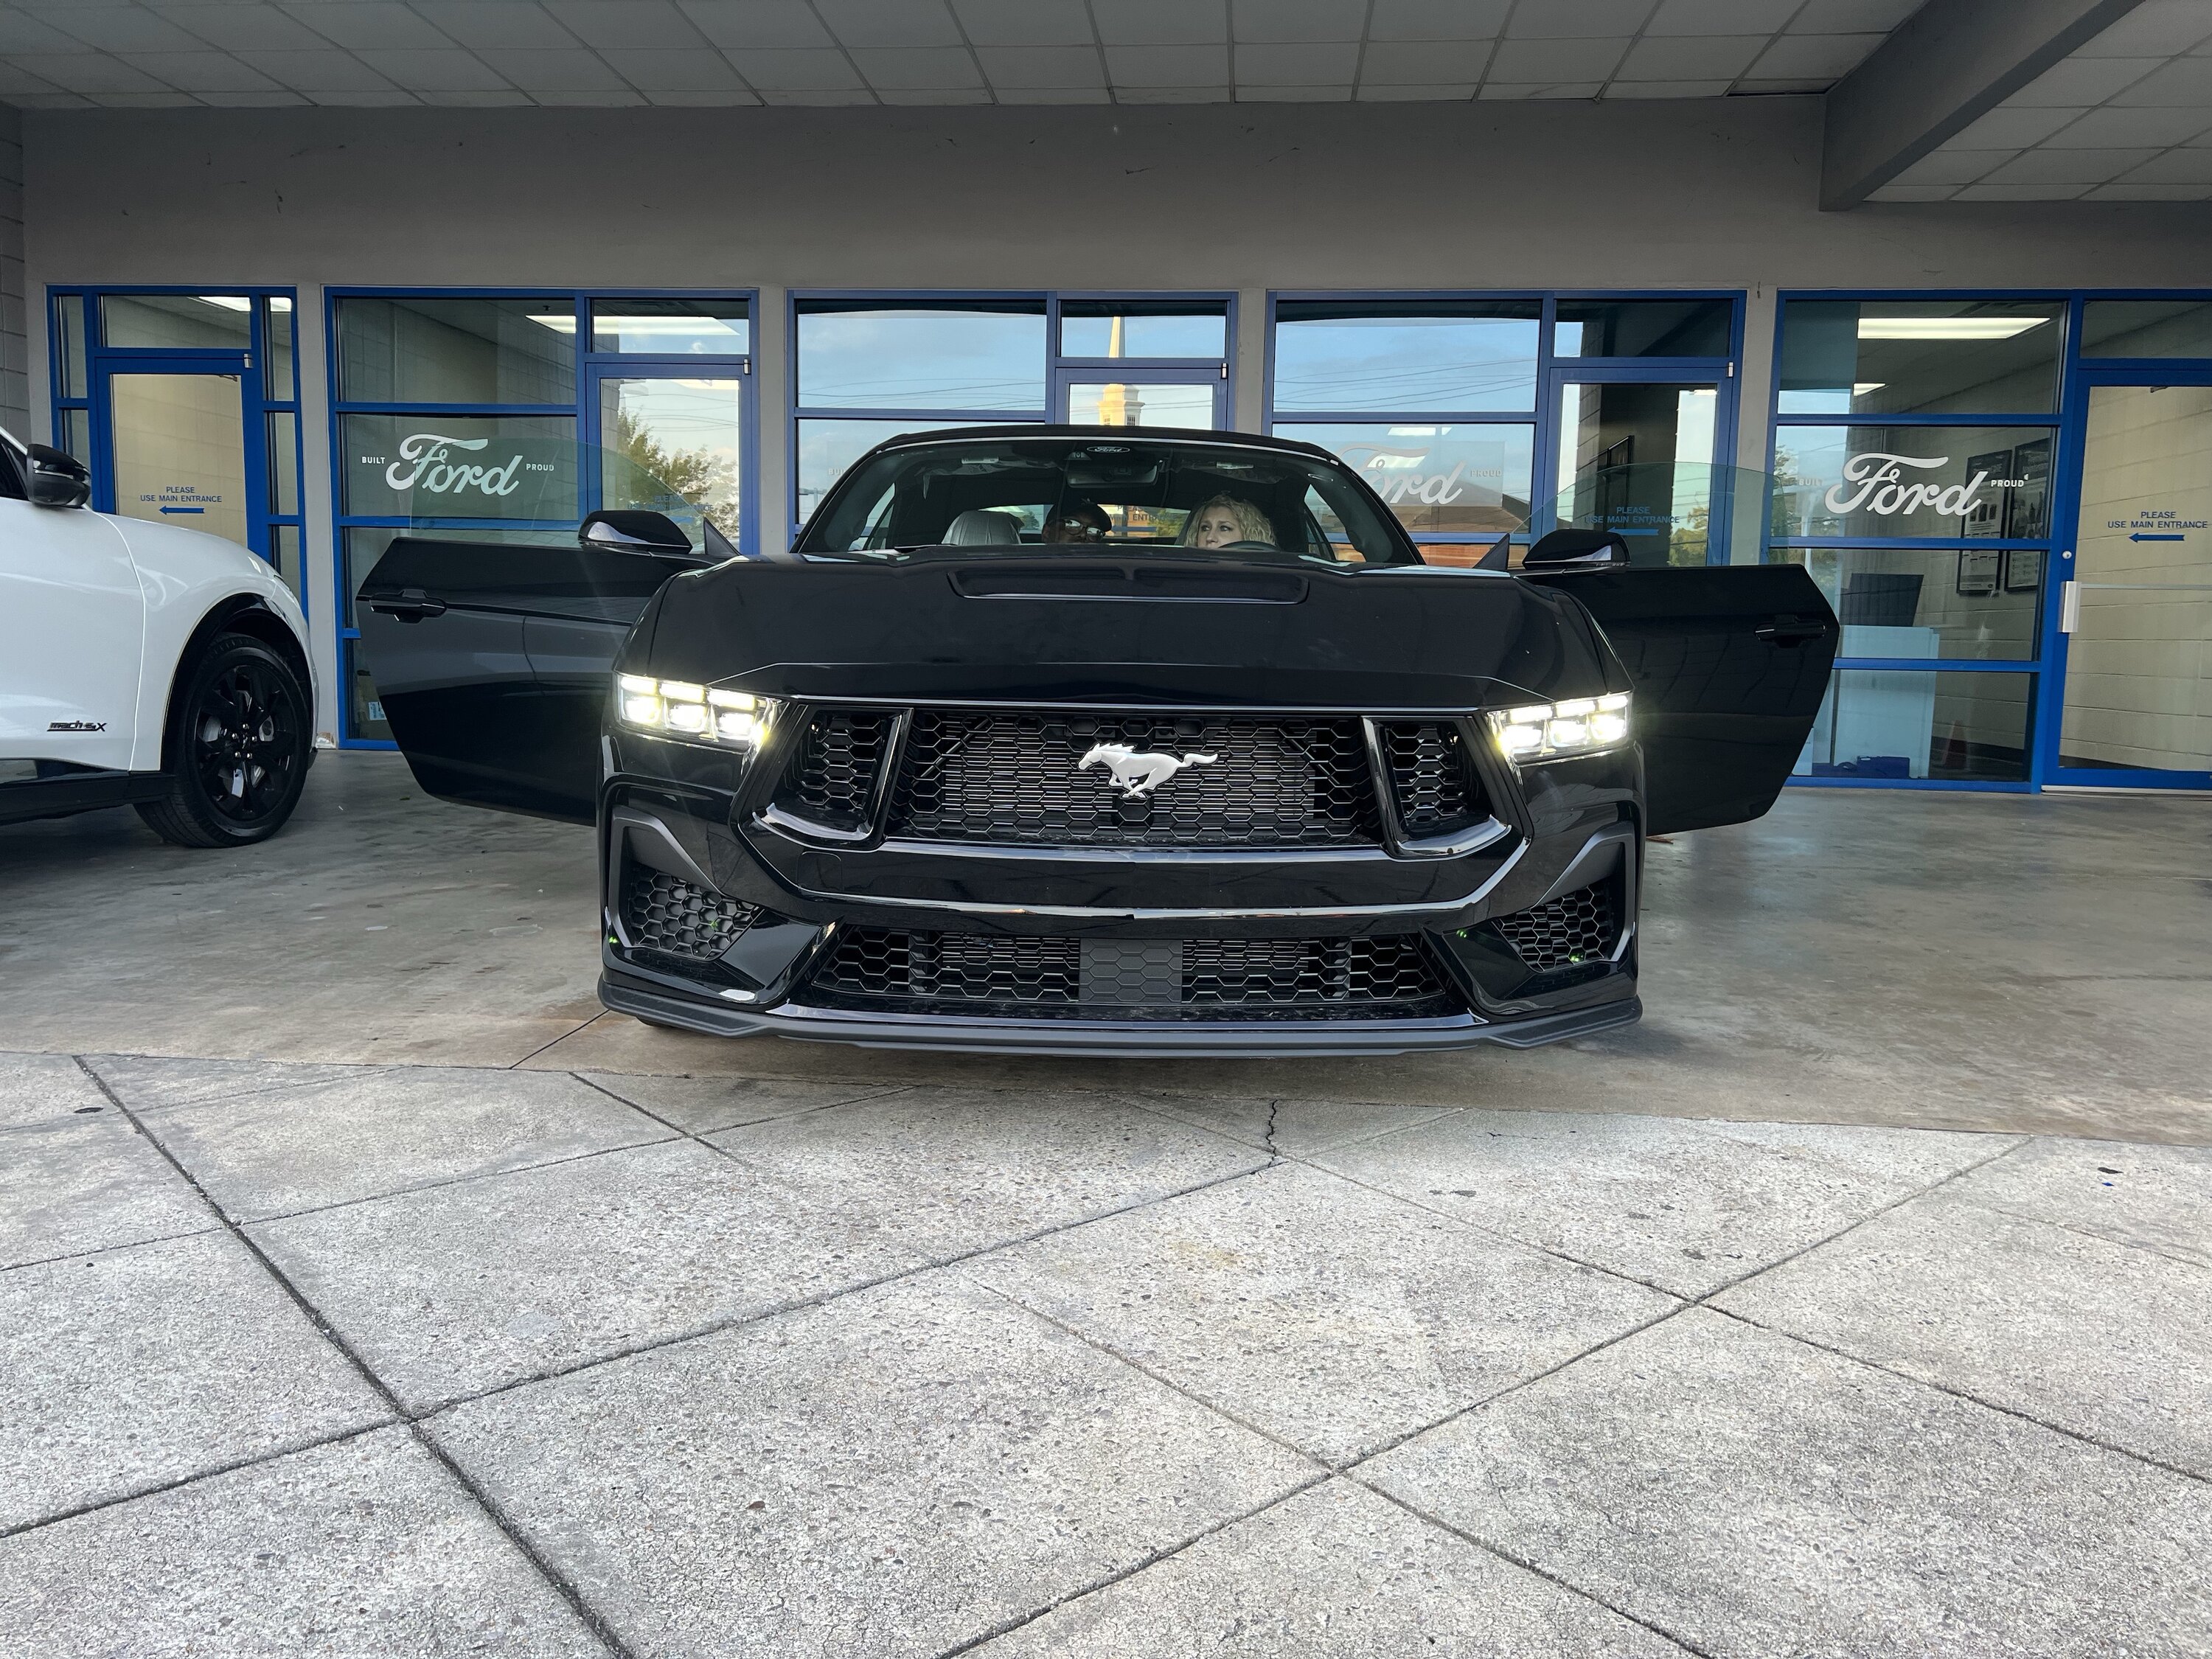 S650 Mustang Triple black GT convertible just arrived IMG_4849